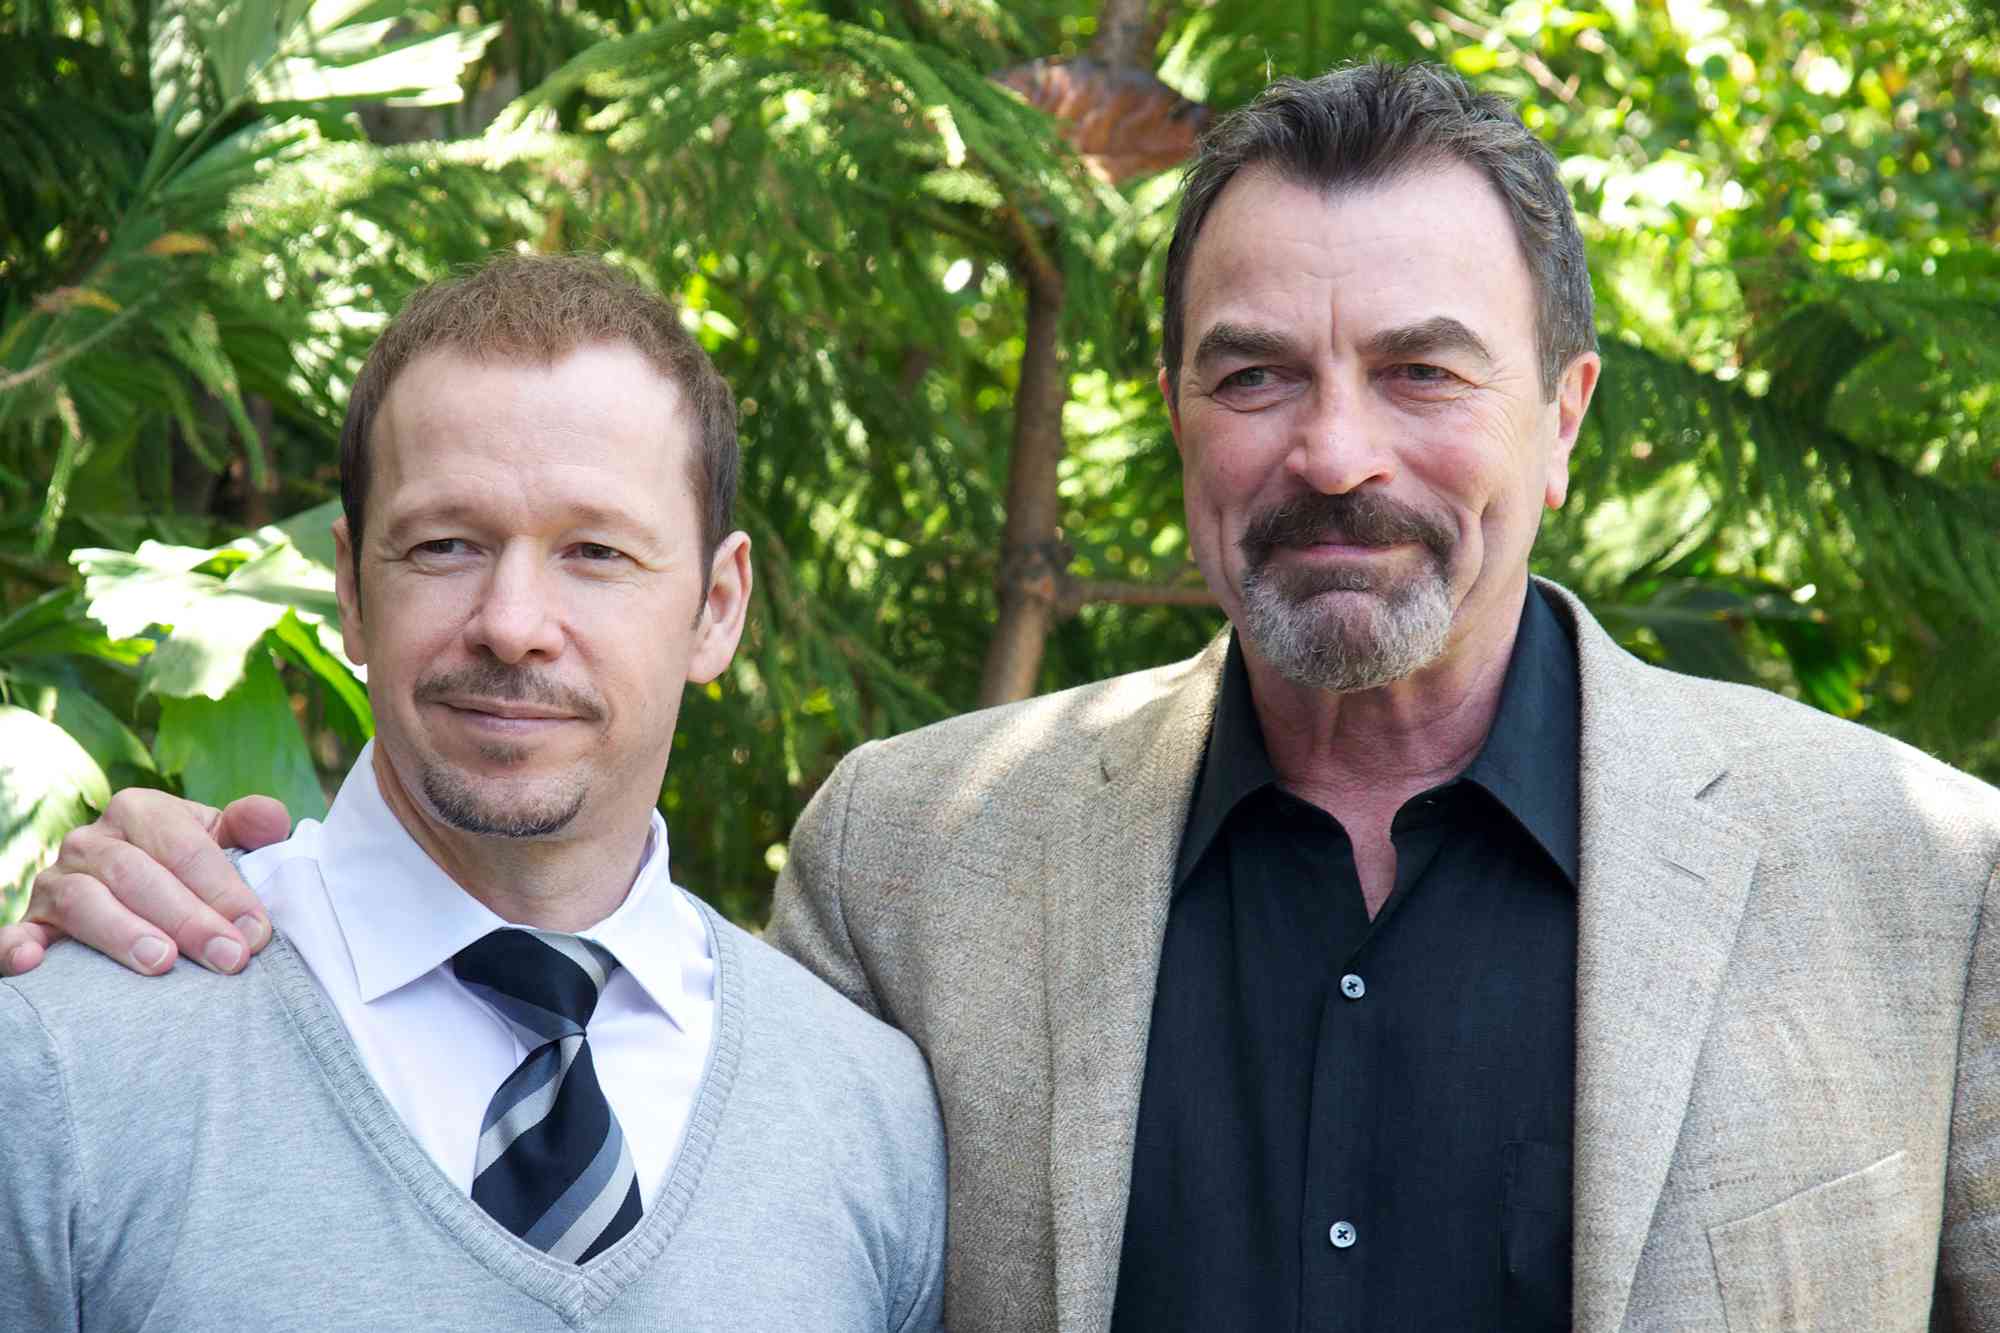 Donnie Wahlberg and Tom Selleck